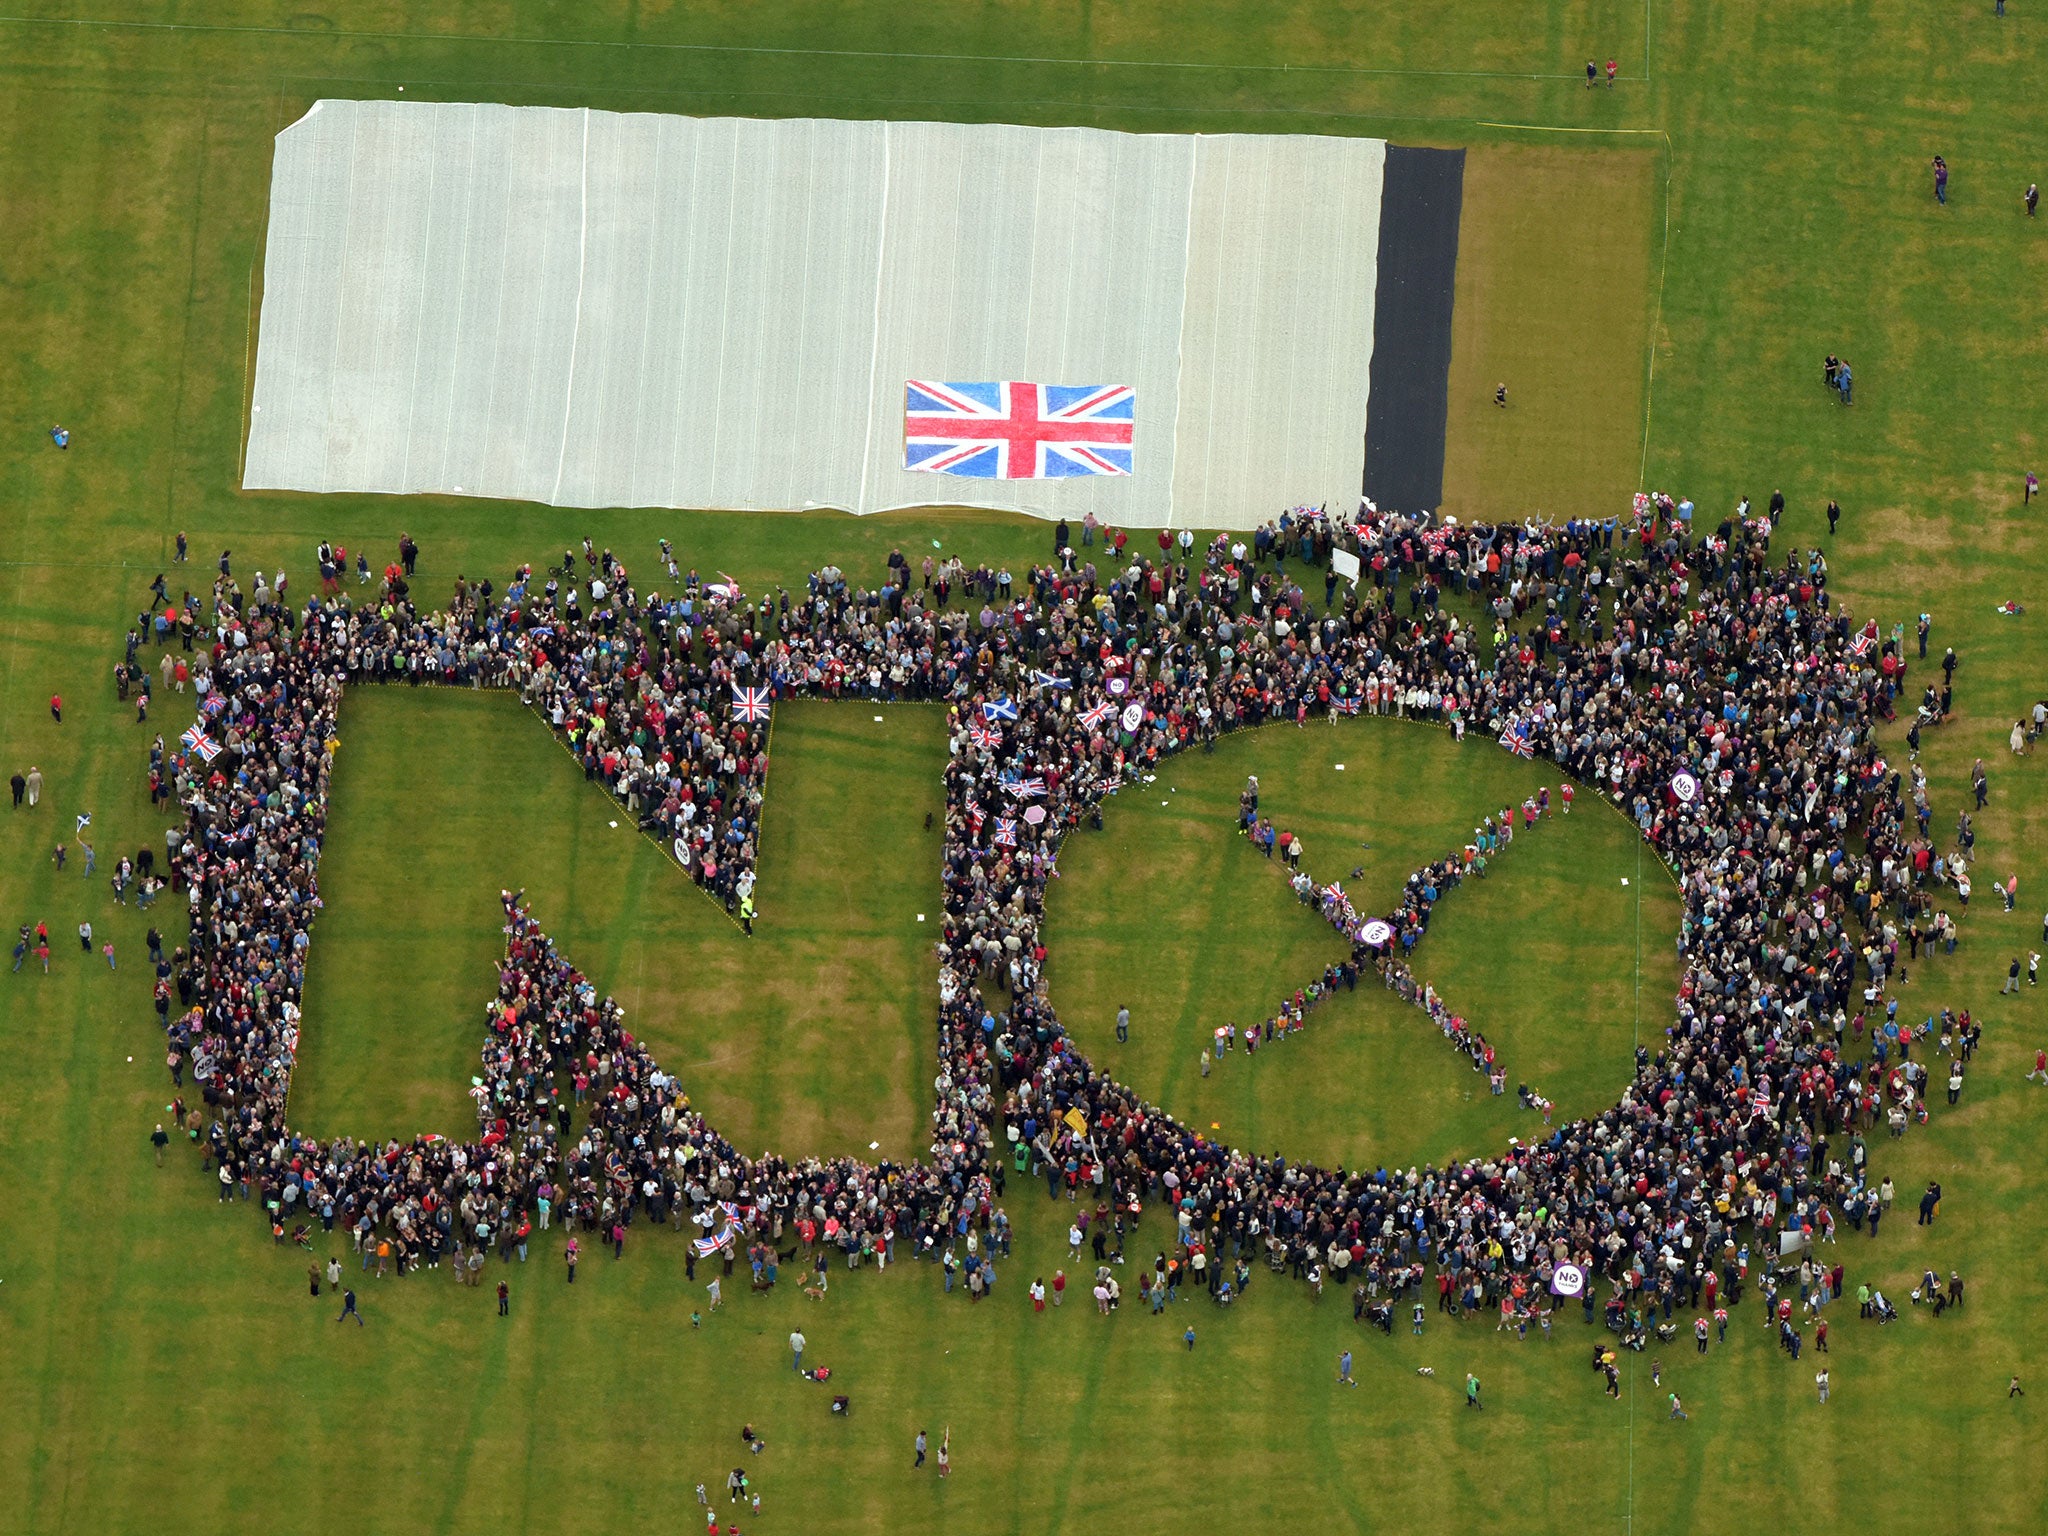 An aerial shot of the rally